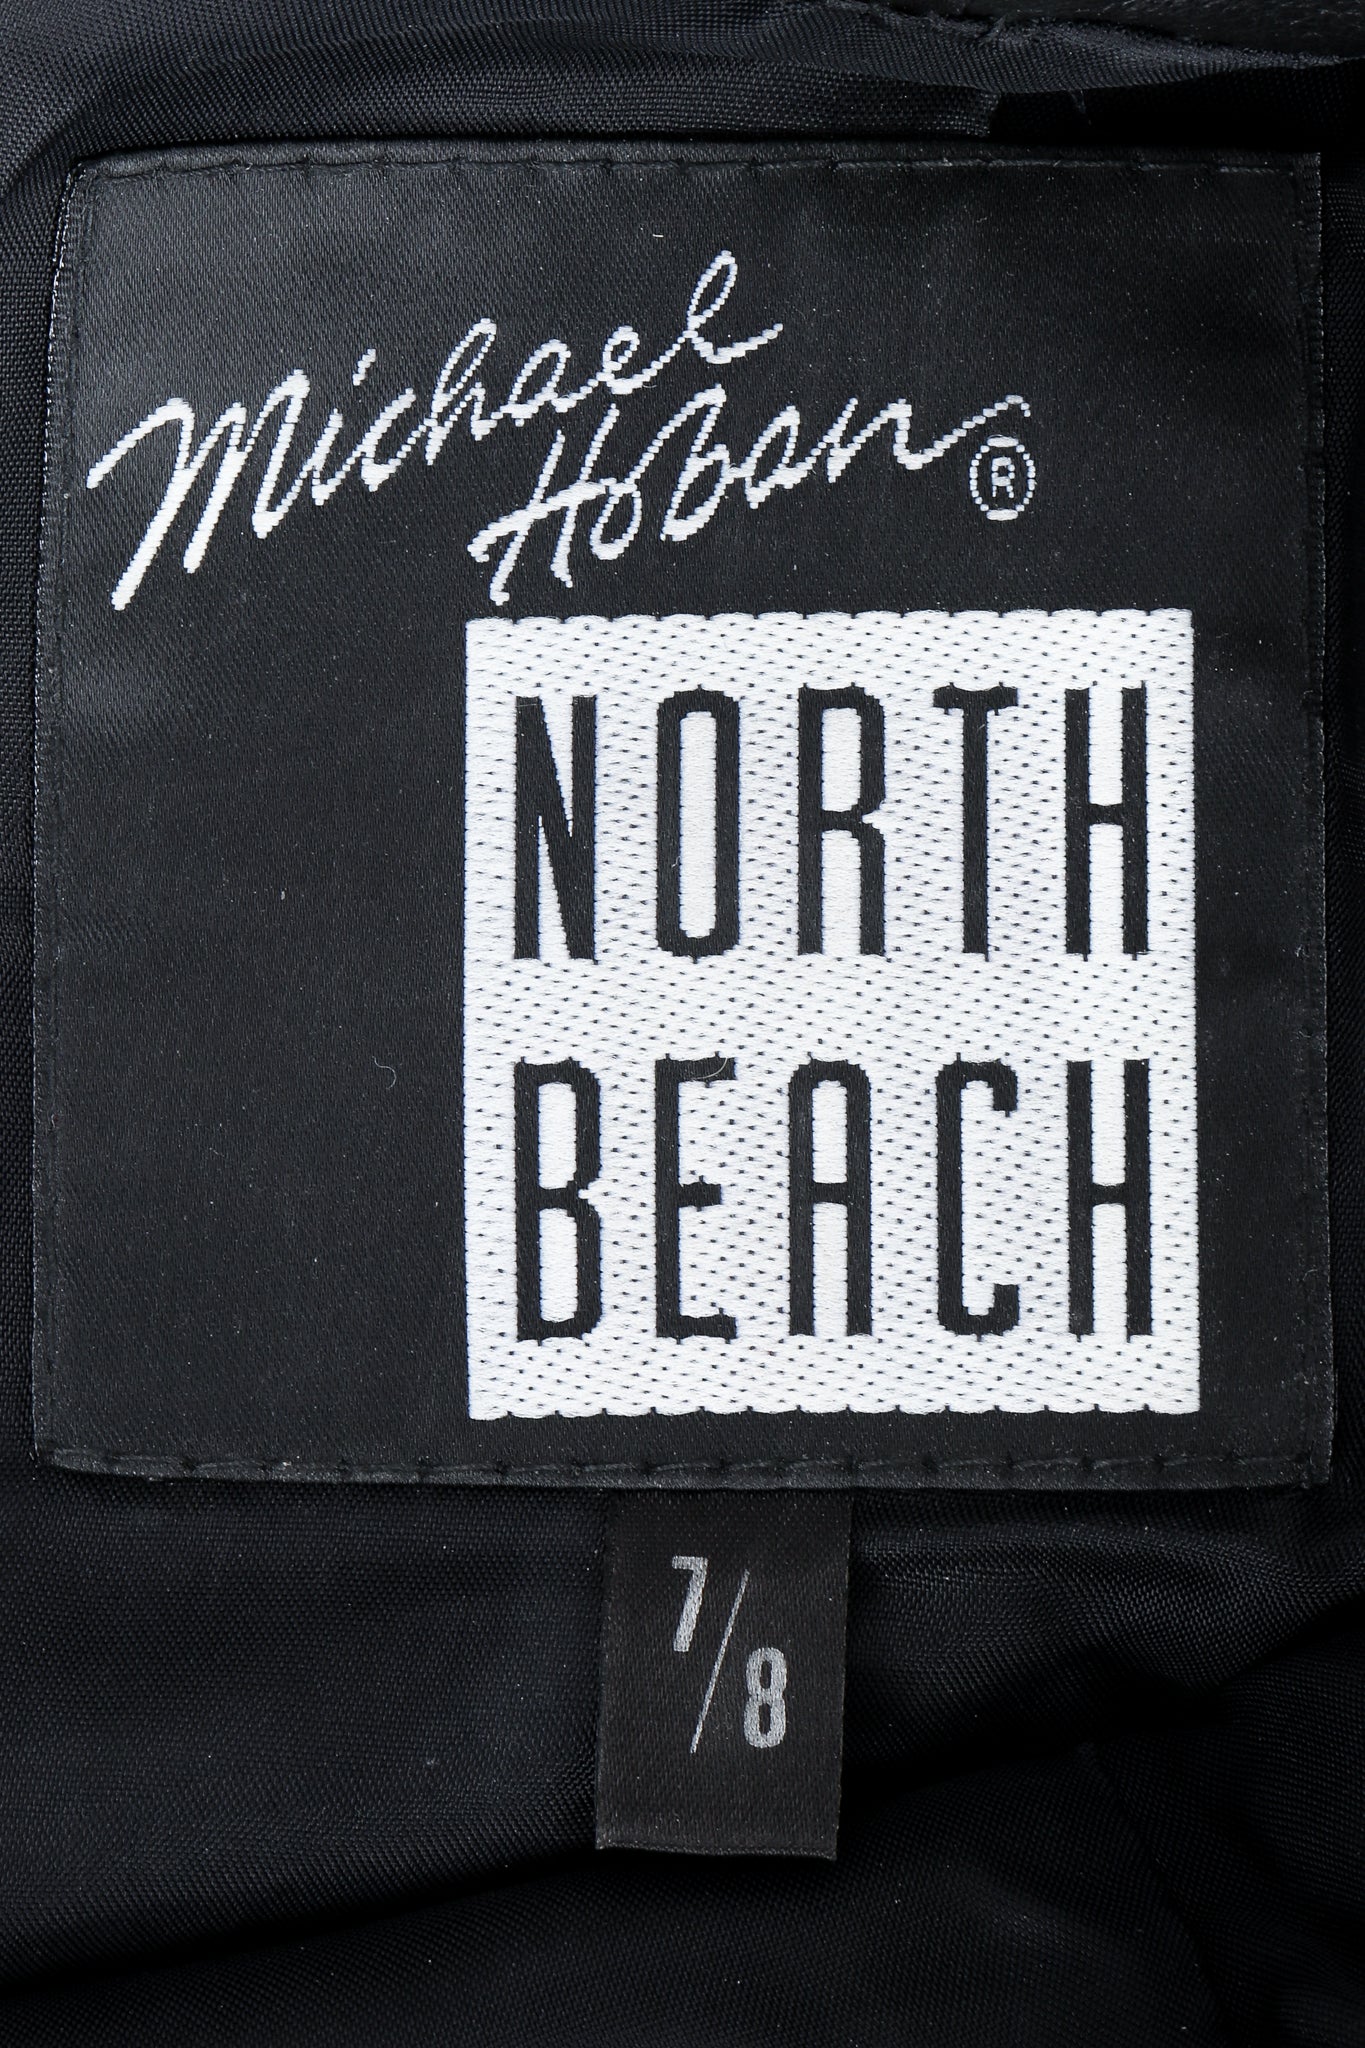 Vintage Michael Hoban for North Beach Leather Leather Bodycon Dress Label at Recess